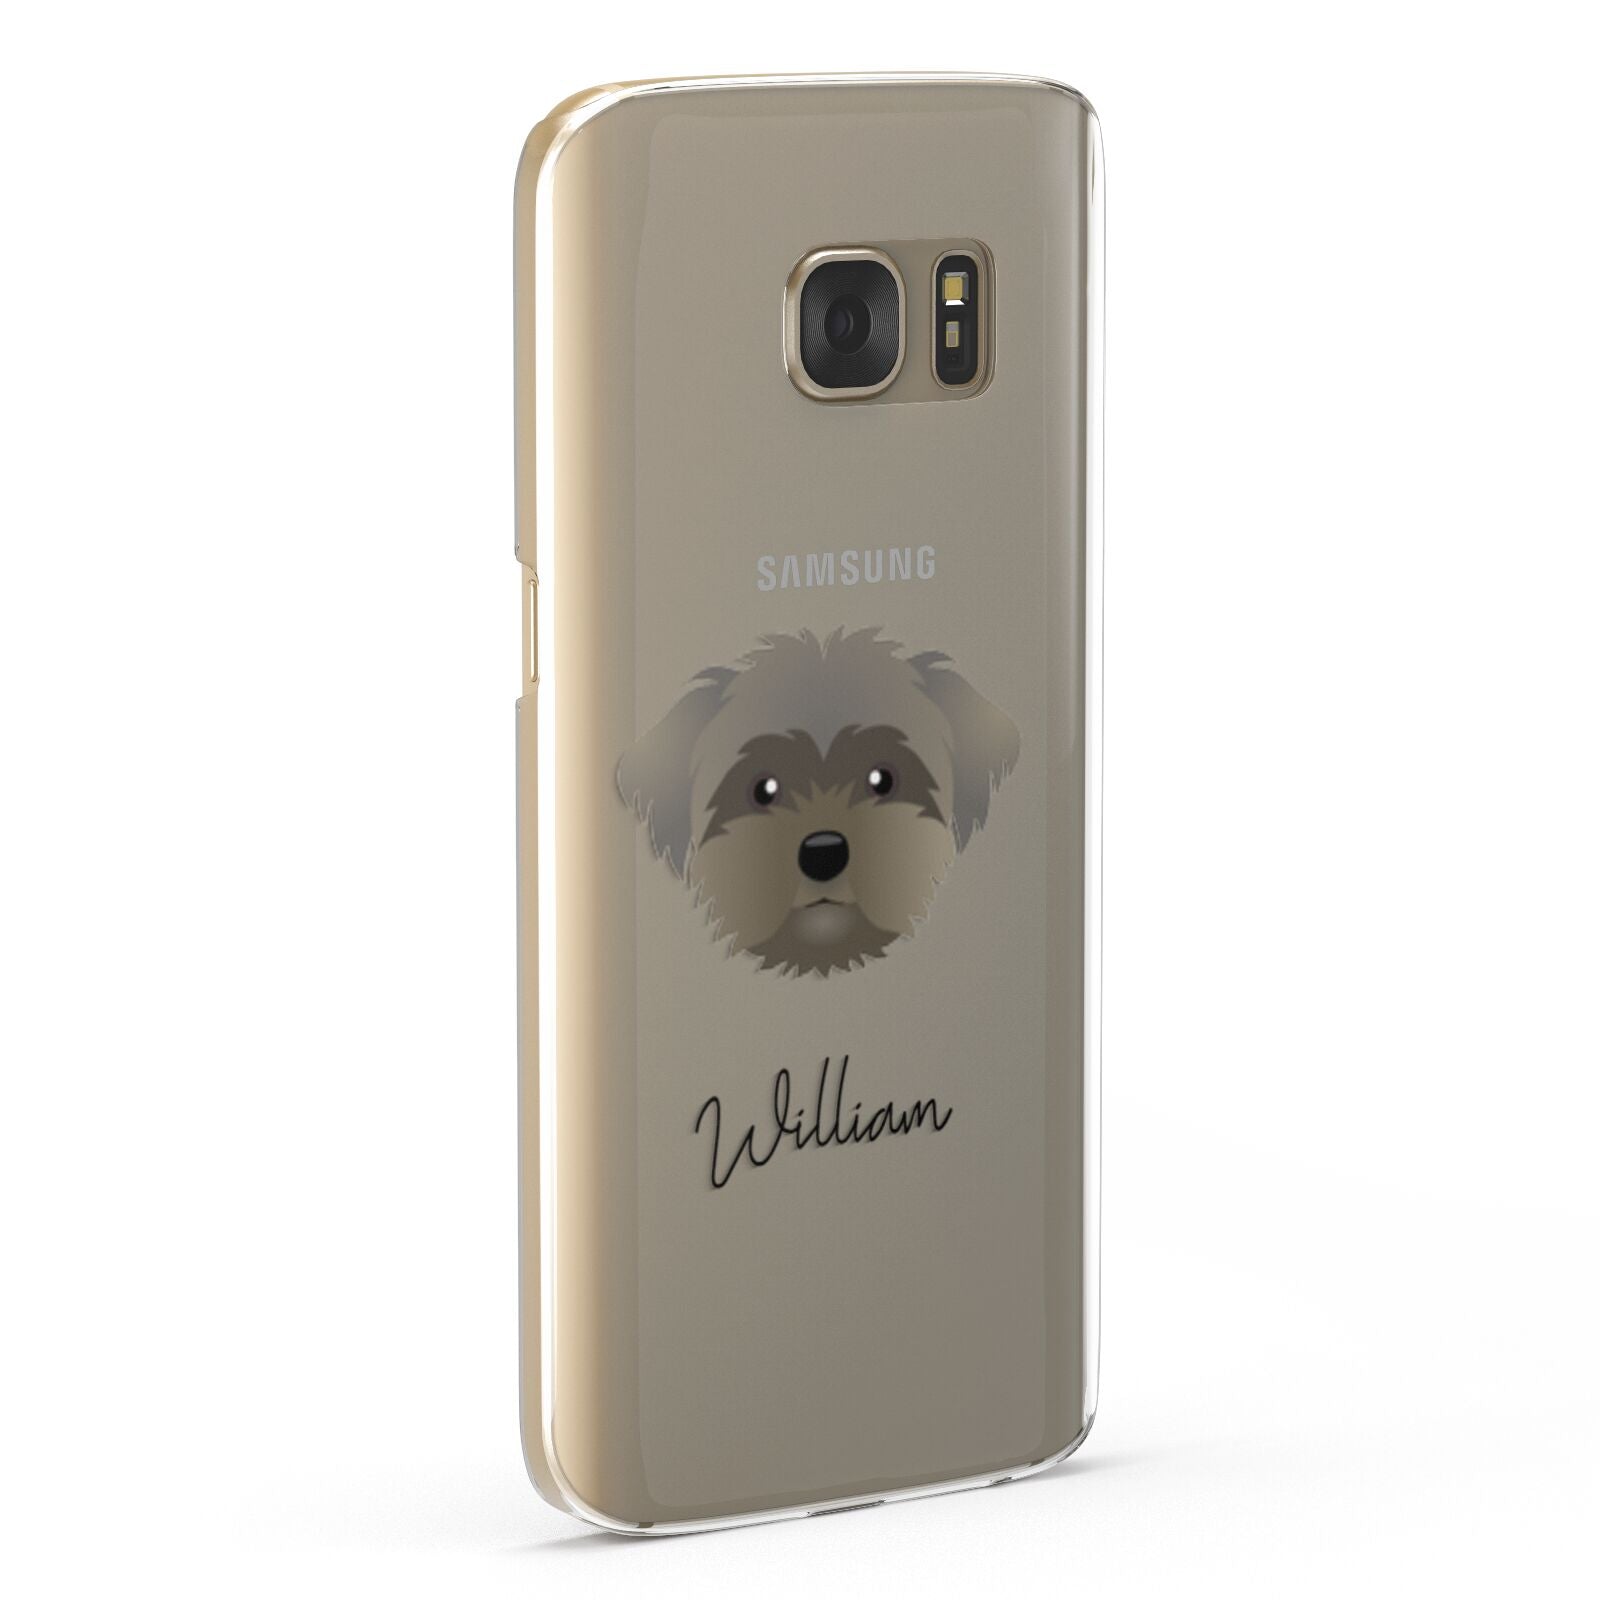 Peek a poo Personalised Samsung Galaxy Case Fourty Five Degrees